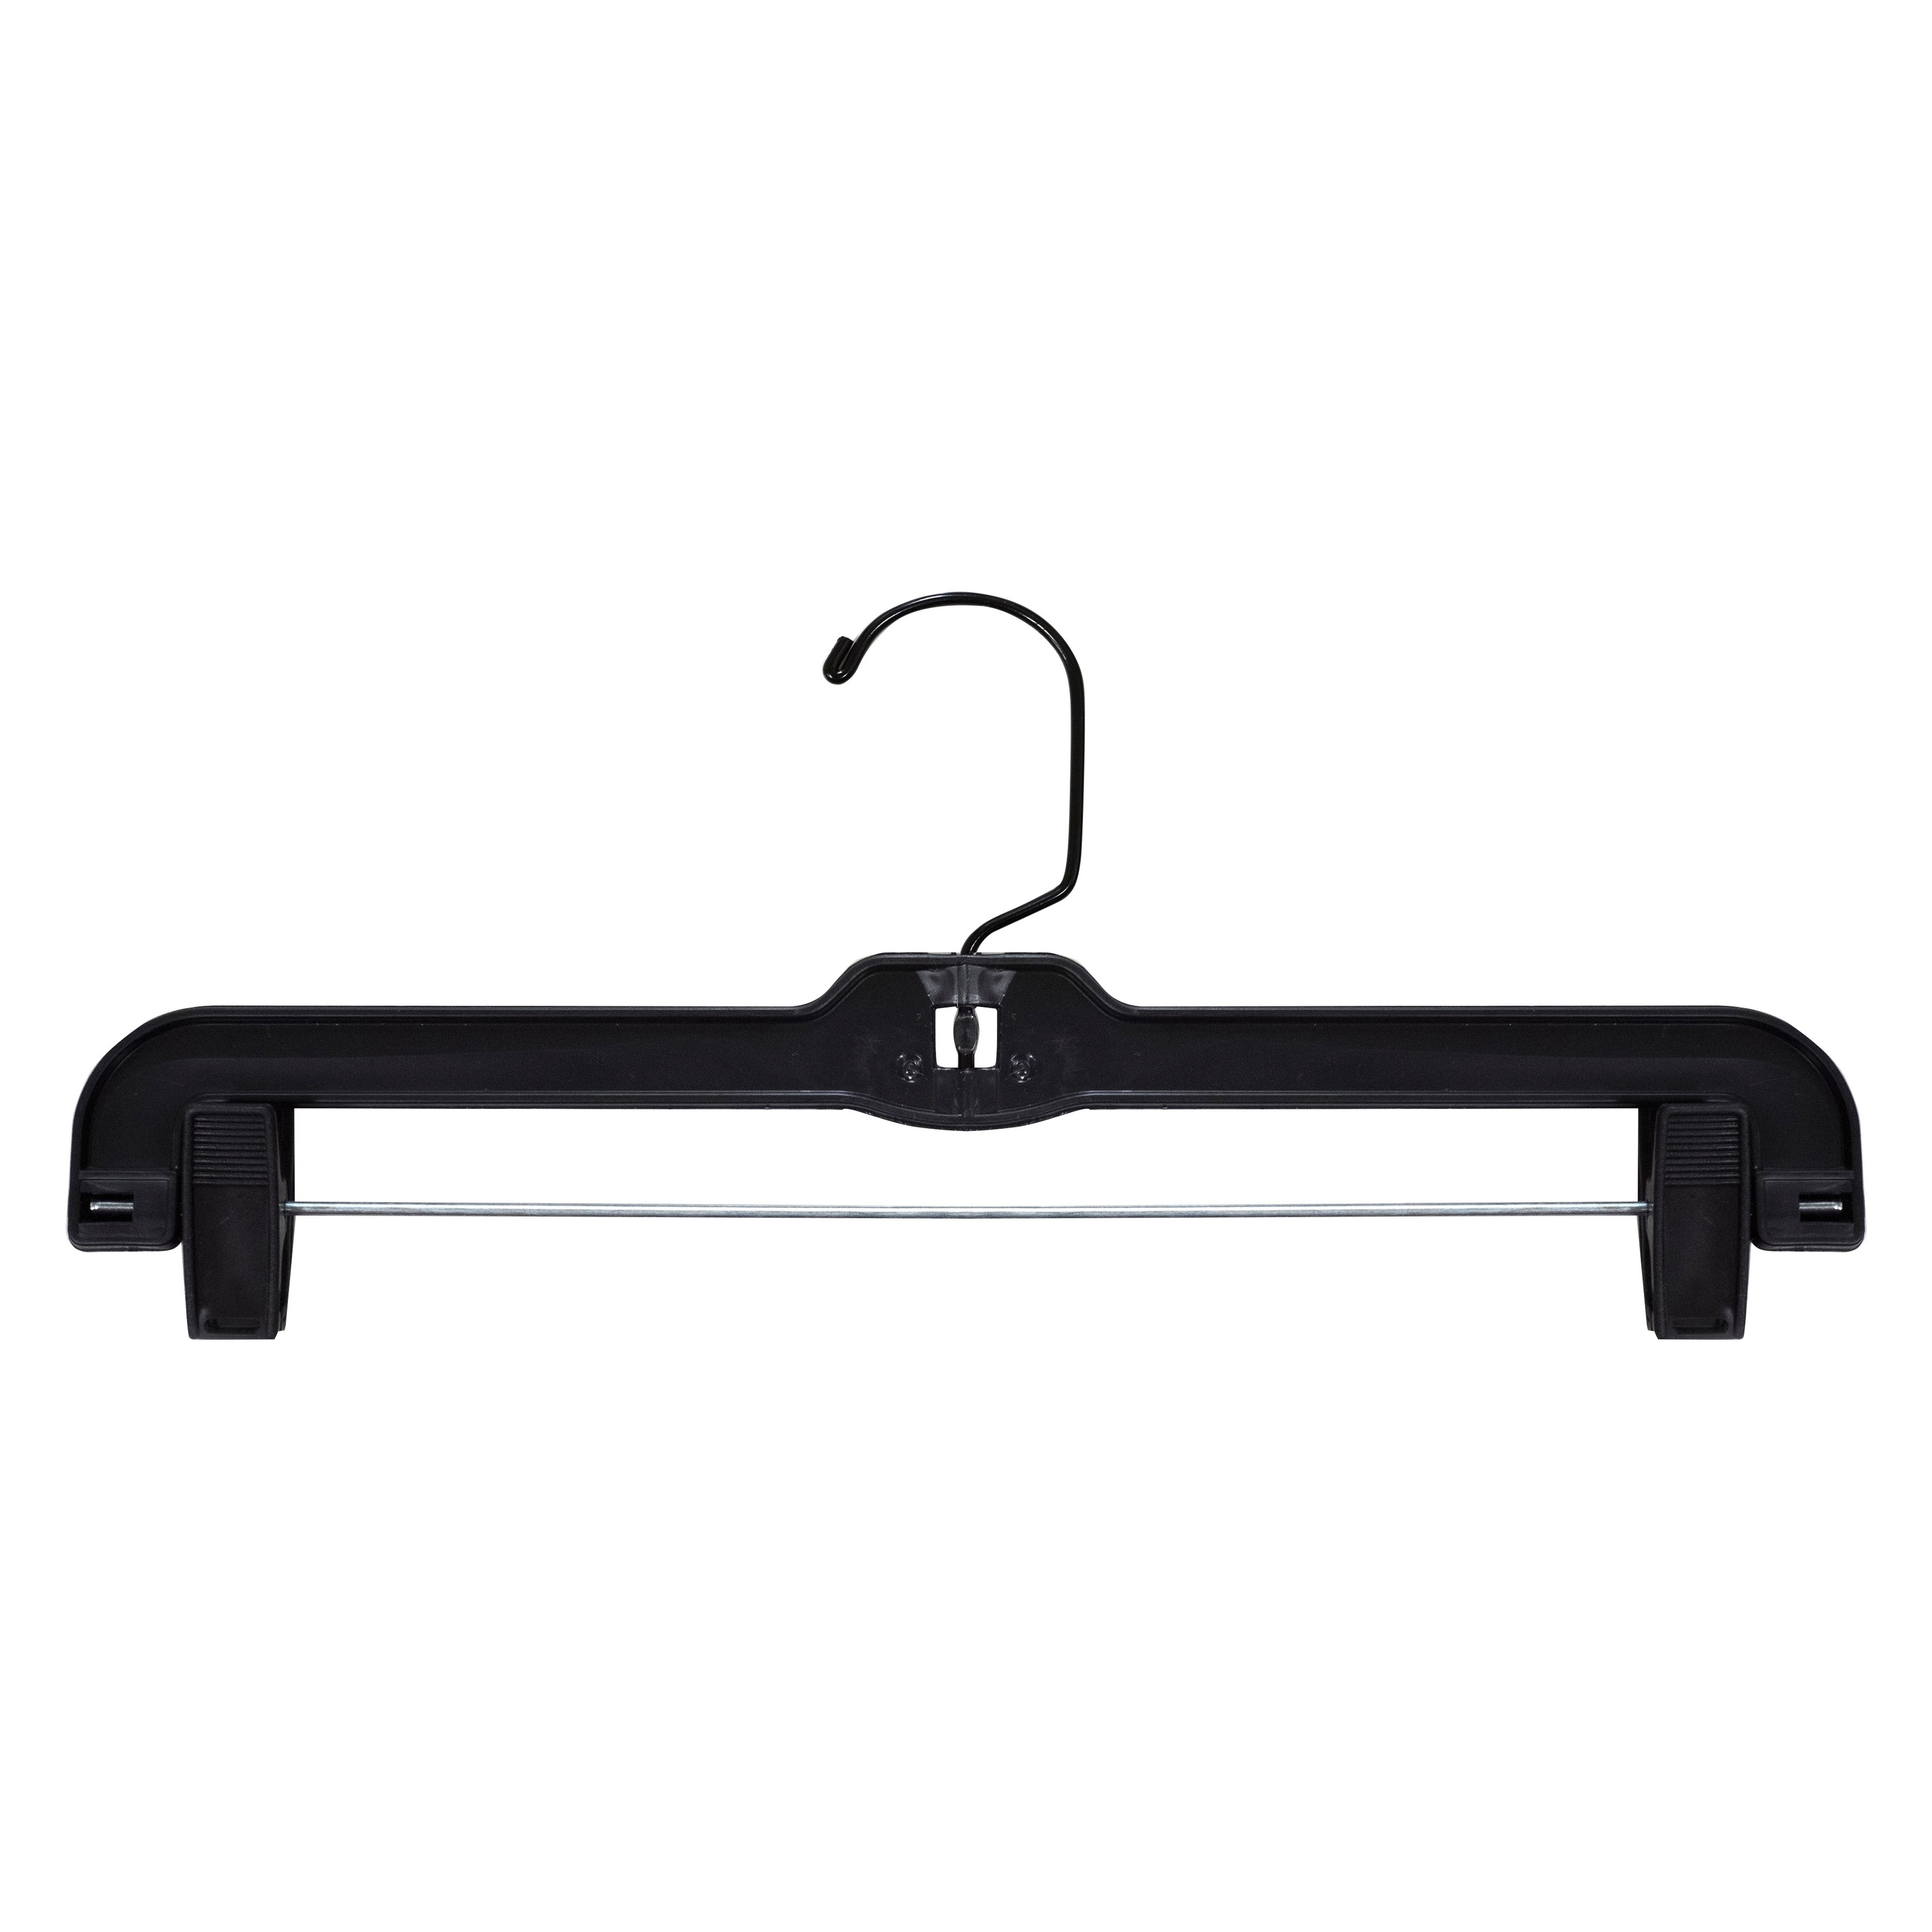 White Tubular Plastic Top Hanger with Suit Bar (Box of 144)